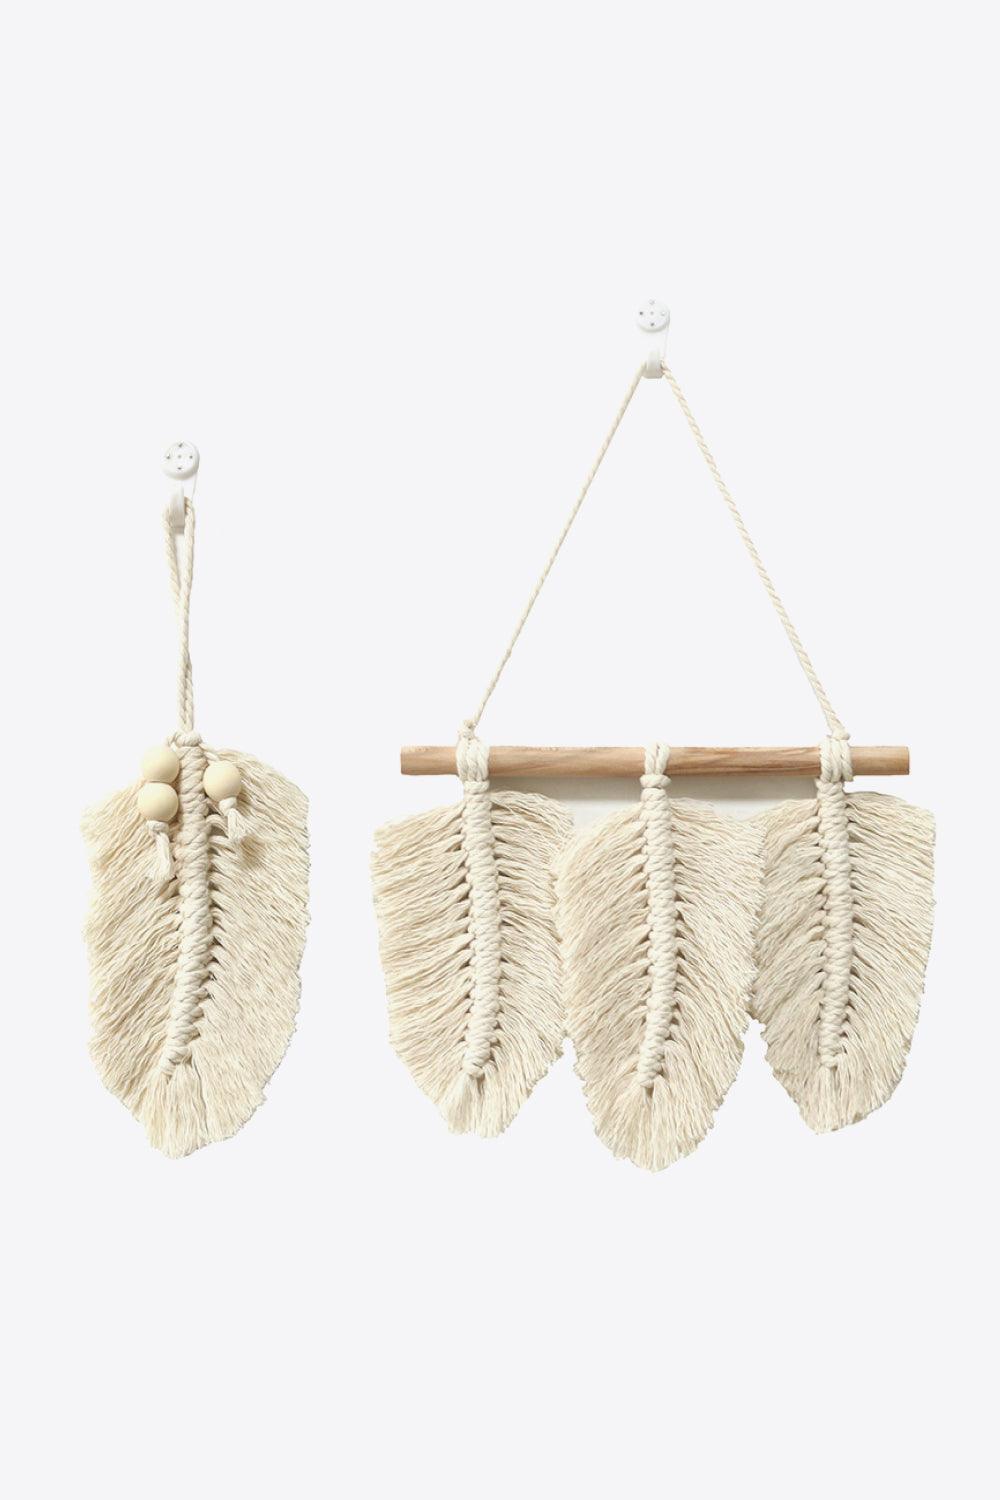 Feather Wall Hanging - Flyclothing LLC